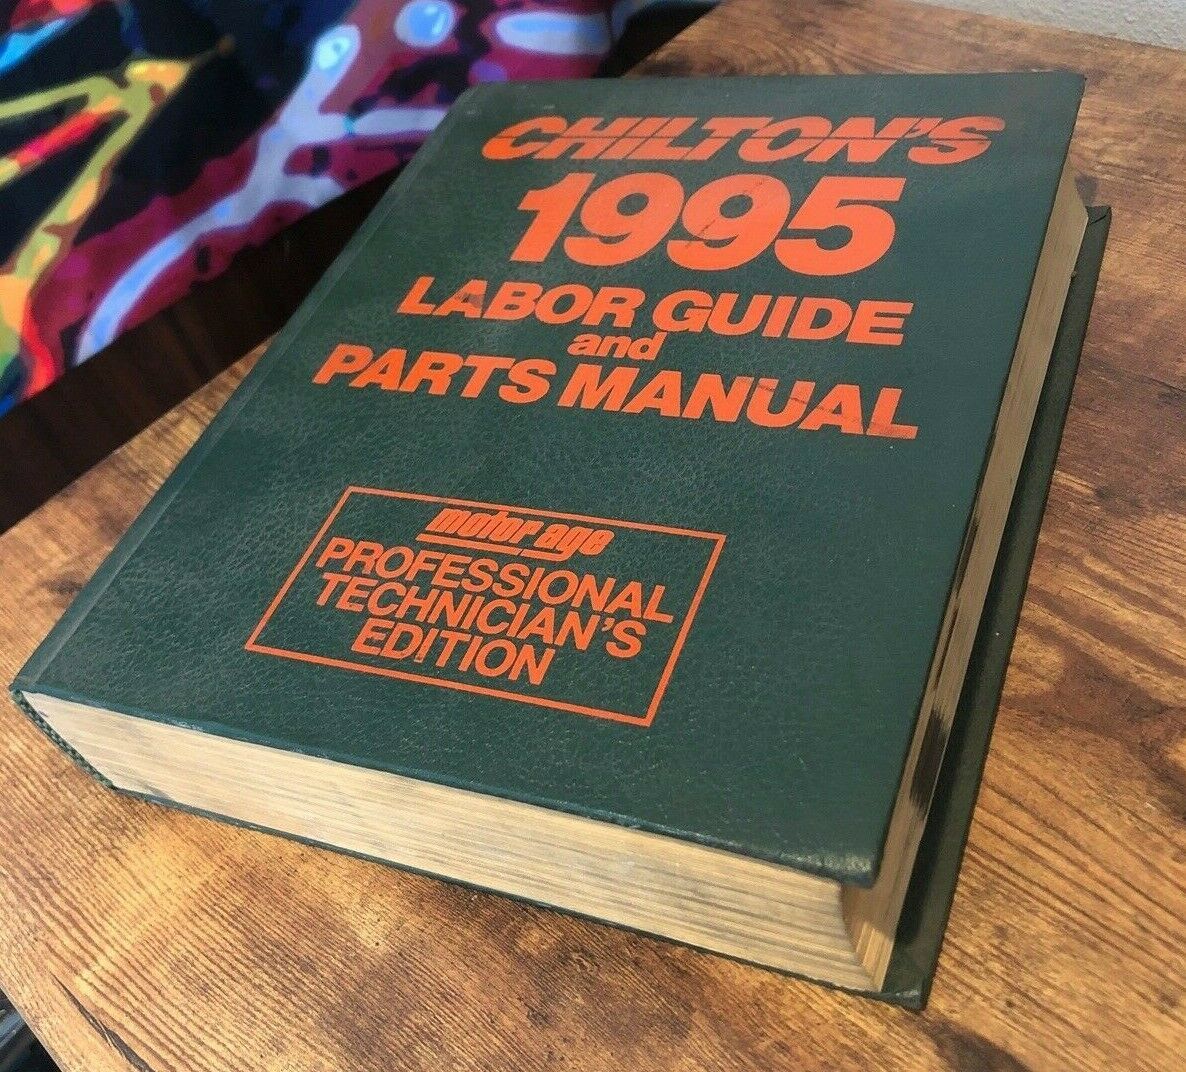 Primary image for 1991-1995 Chilton Labor Guide Parts Manual Professional 8570